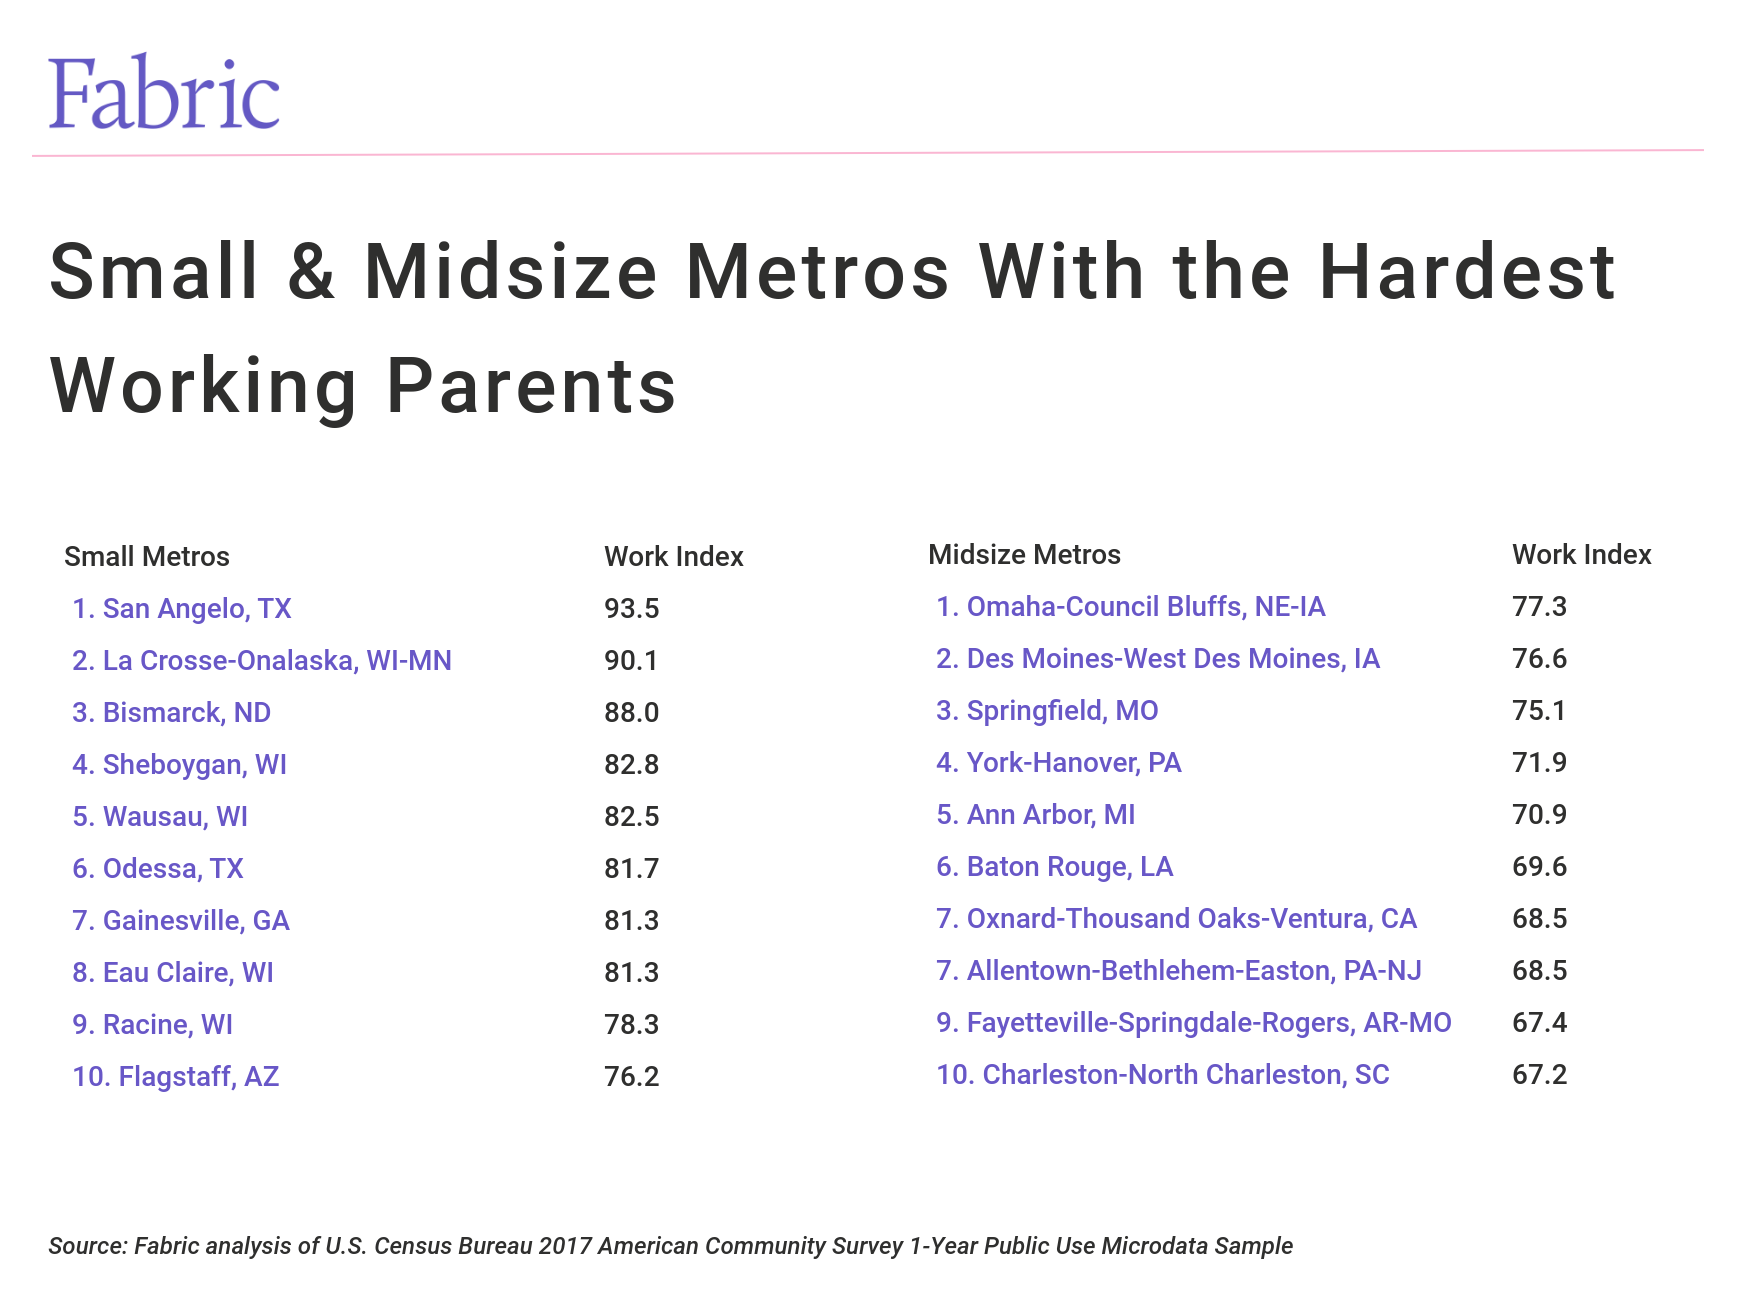 Top ten small cities and top ten midsize cities with the hardest working parents